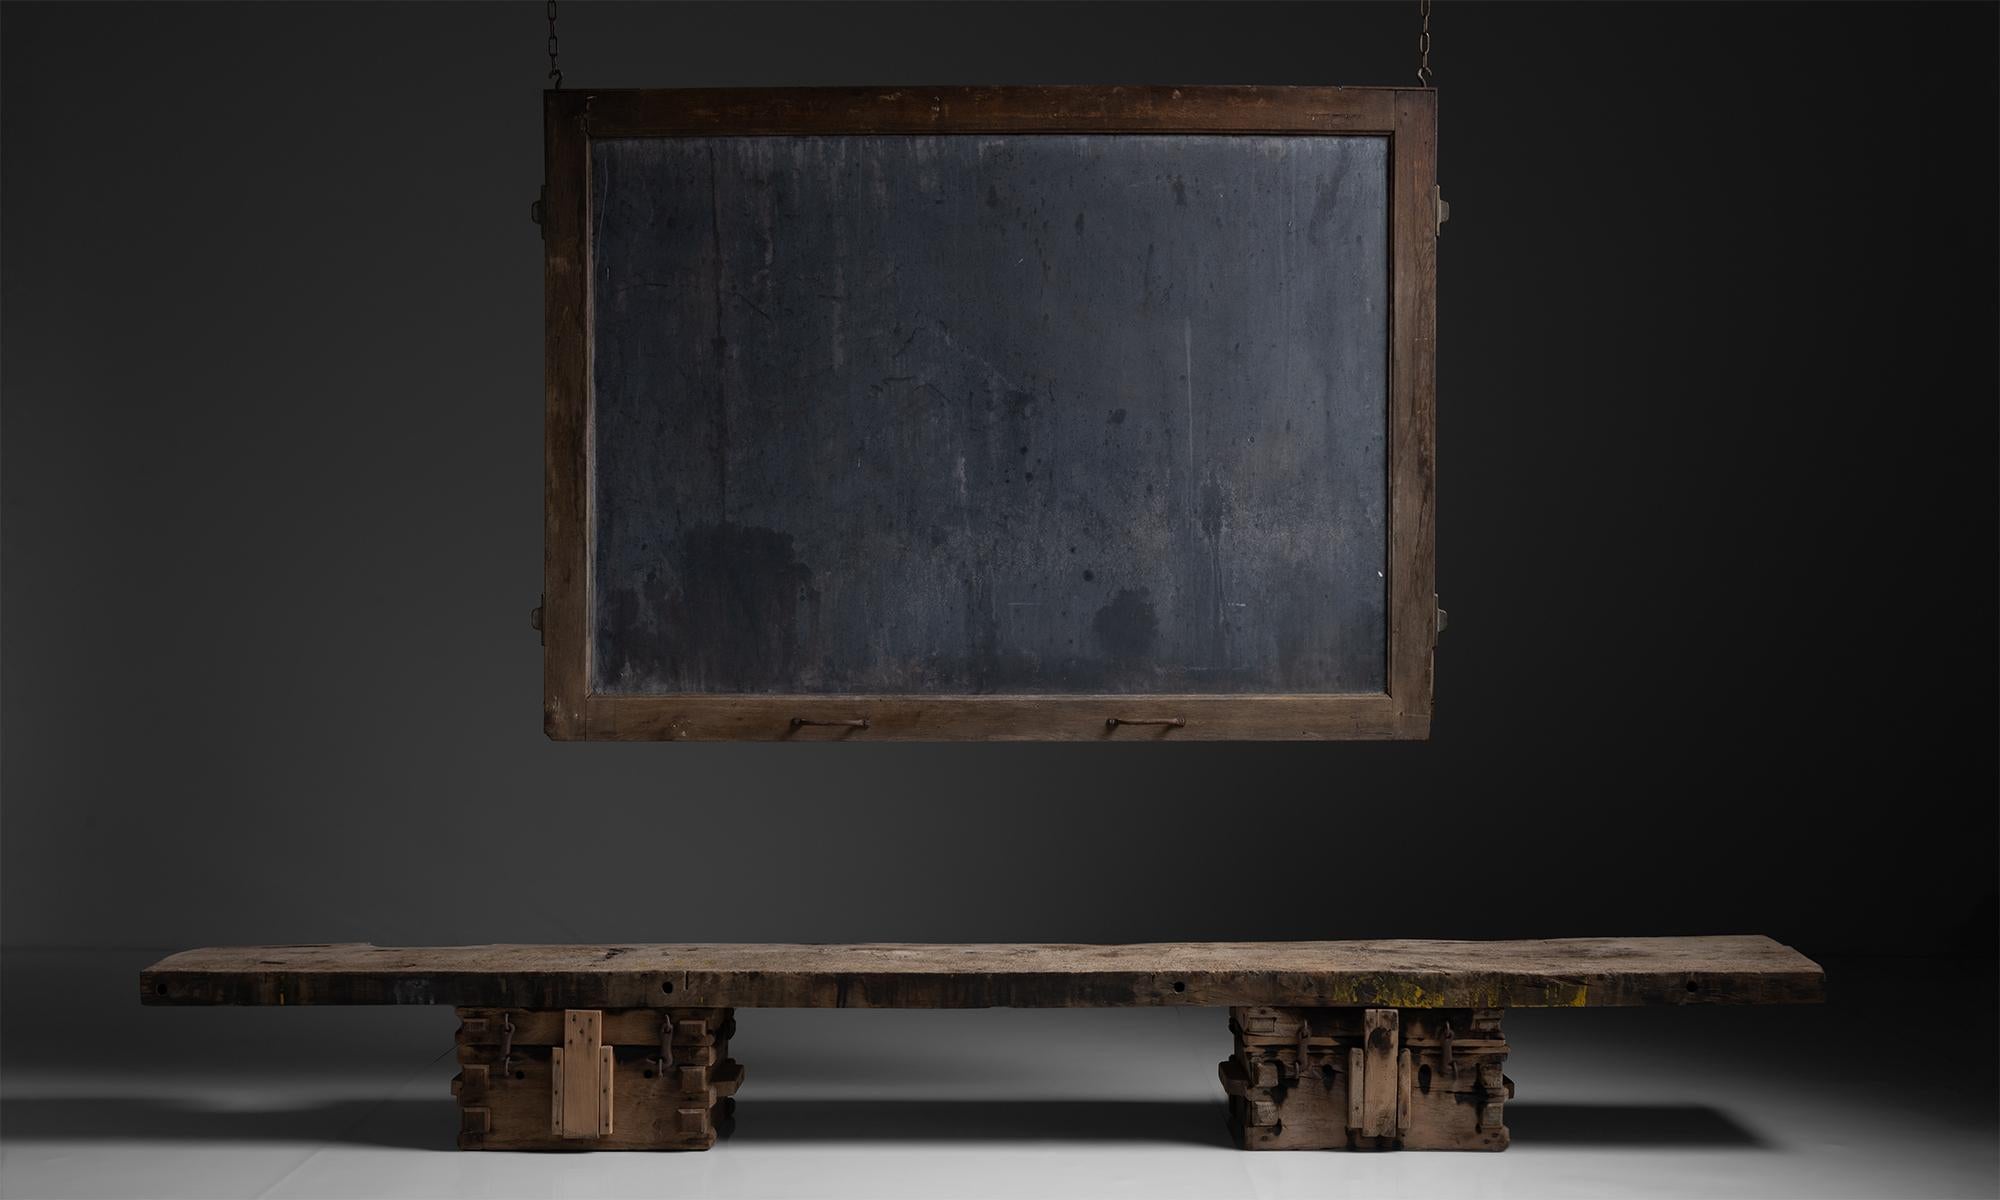 *Please note the price is per unit*
Institutional Slate Blackboards
France, circa 1900
Schoolroom Slate blackboard with oak surround and iron handles.
Measures 76”L x 3.4”d (w/ handle) x 54”h.